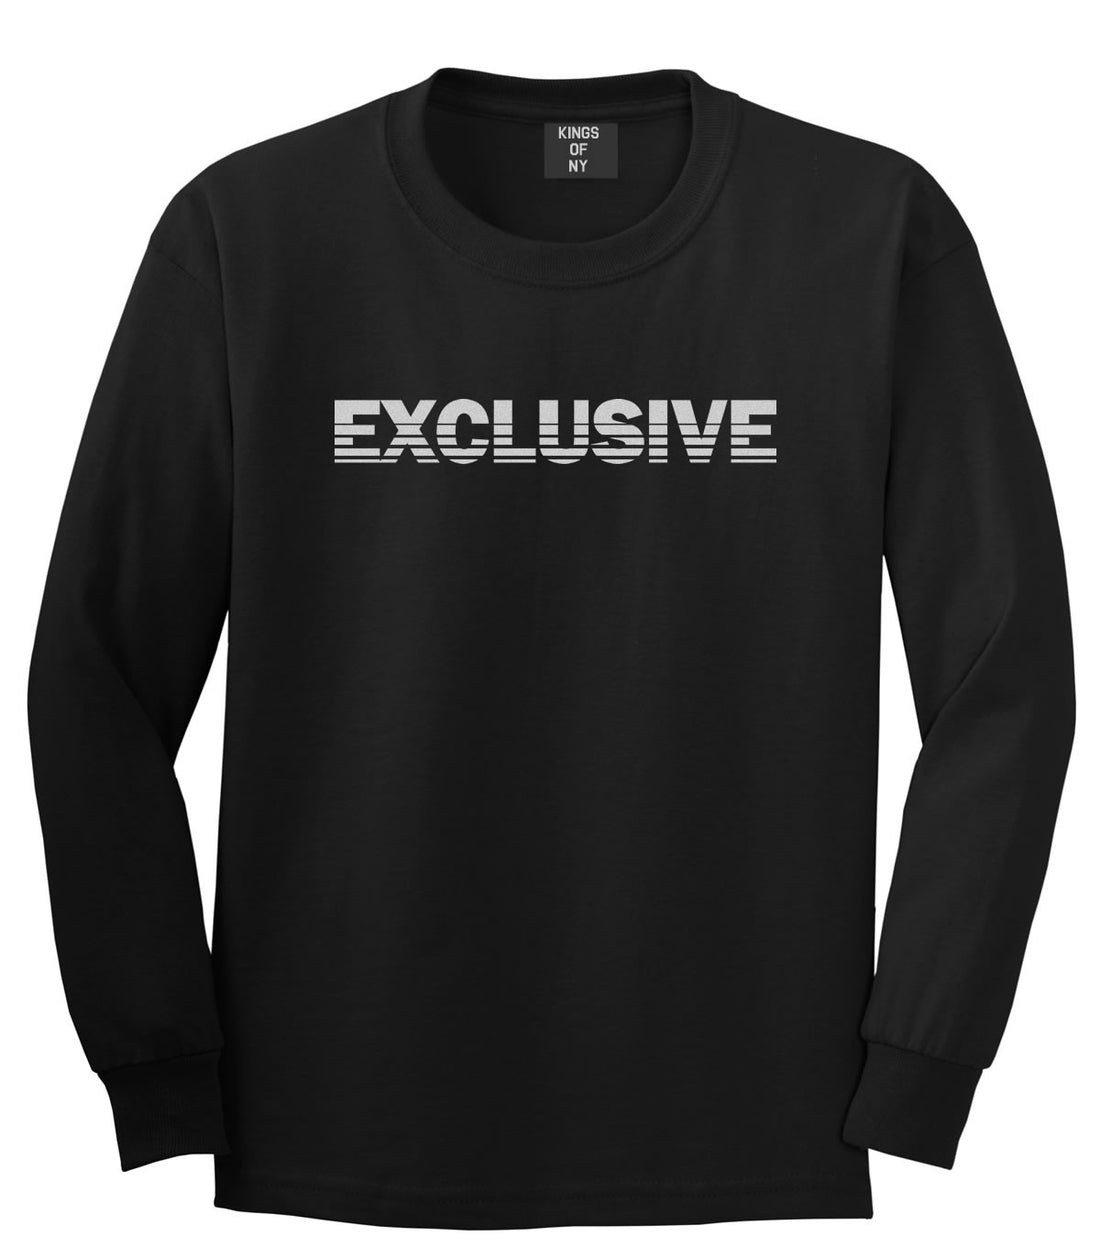 Exclusive Racing Style Boys Kids Long Sleeve T-Shirt in Black by Kings Of NY